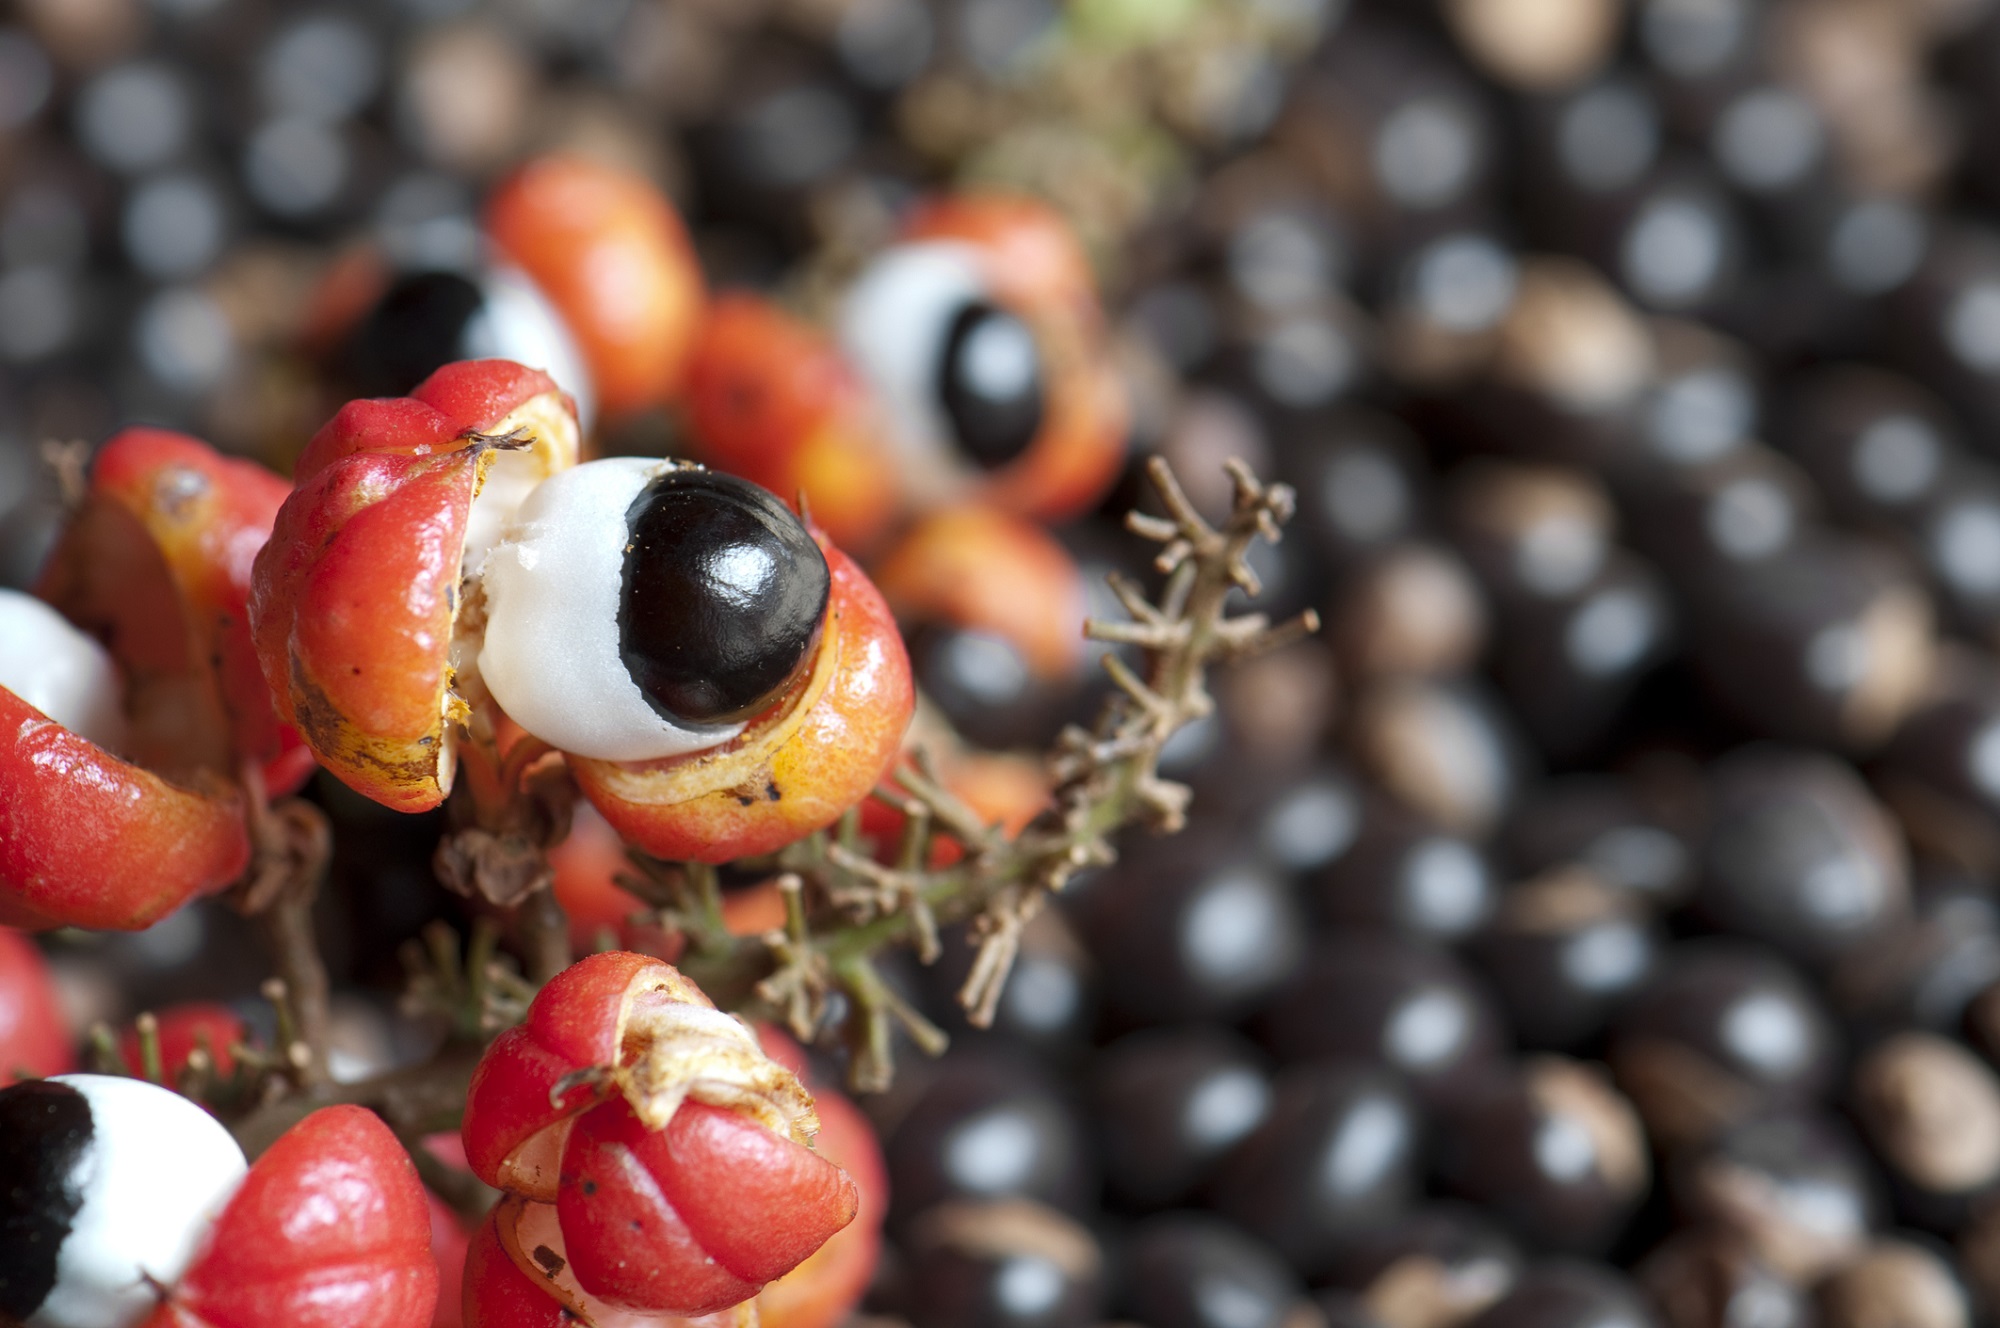 Guarana for promoting healthy skin